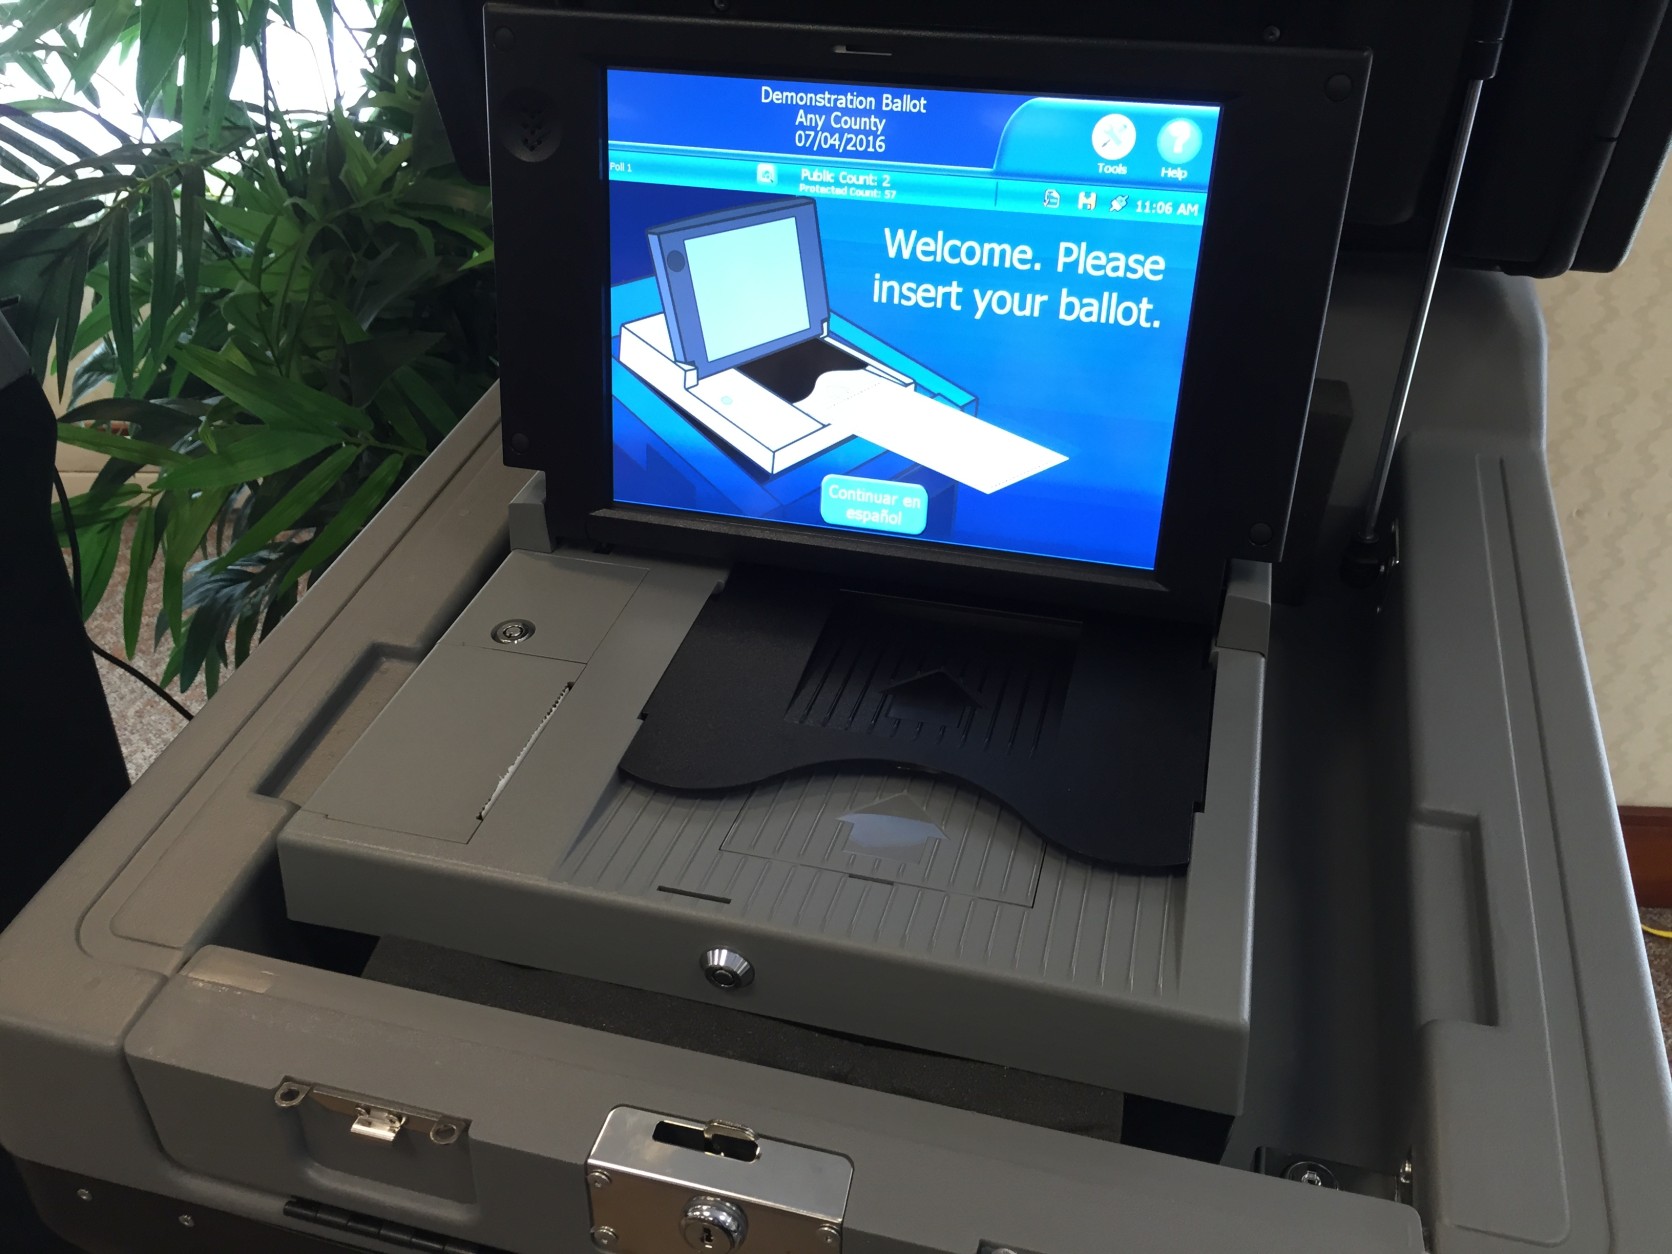 Touch screens will generate new paper ballots, which will then be electronically recorded. (WTOP/Andrew Mollenebeck)